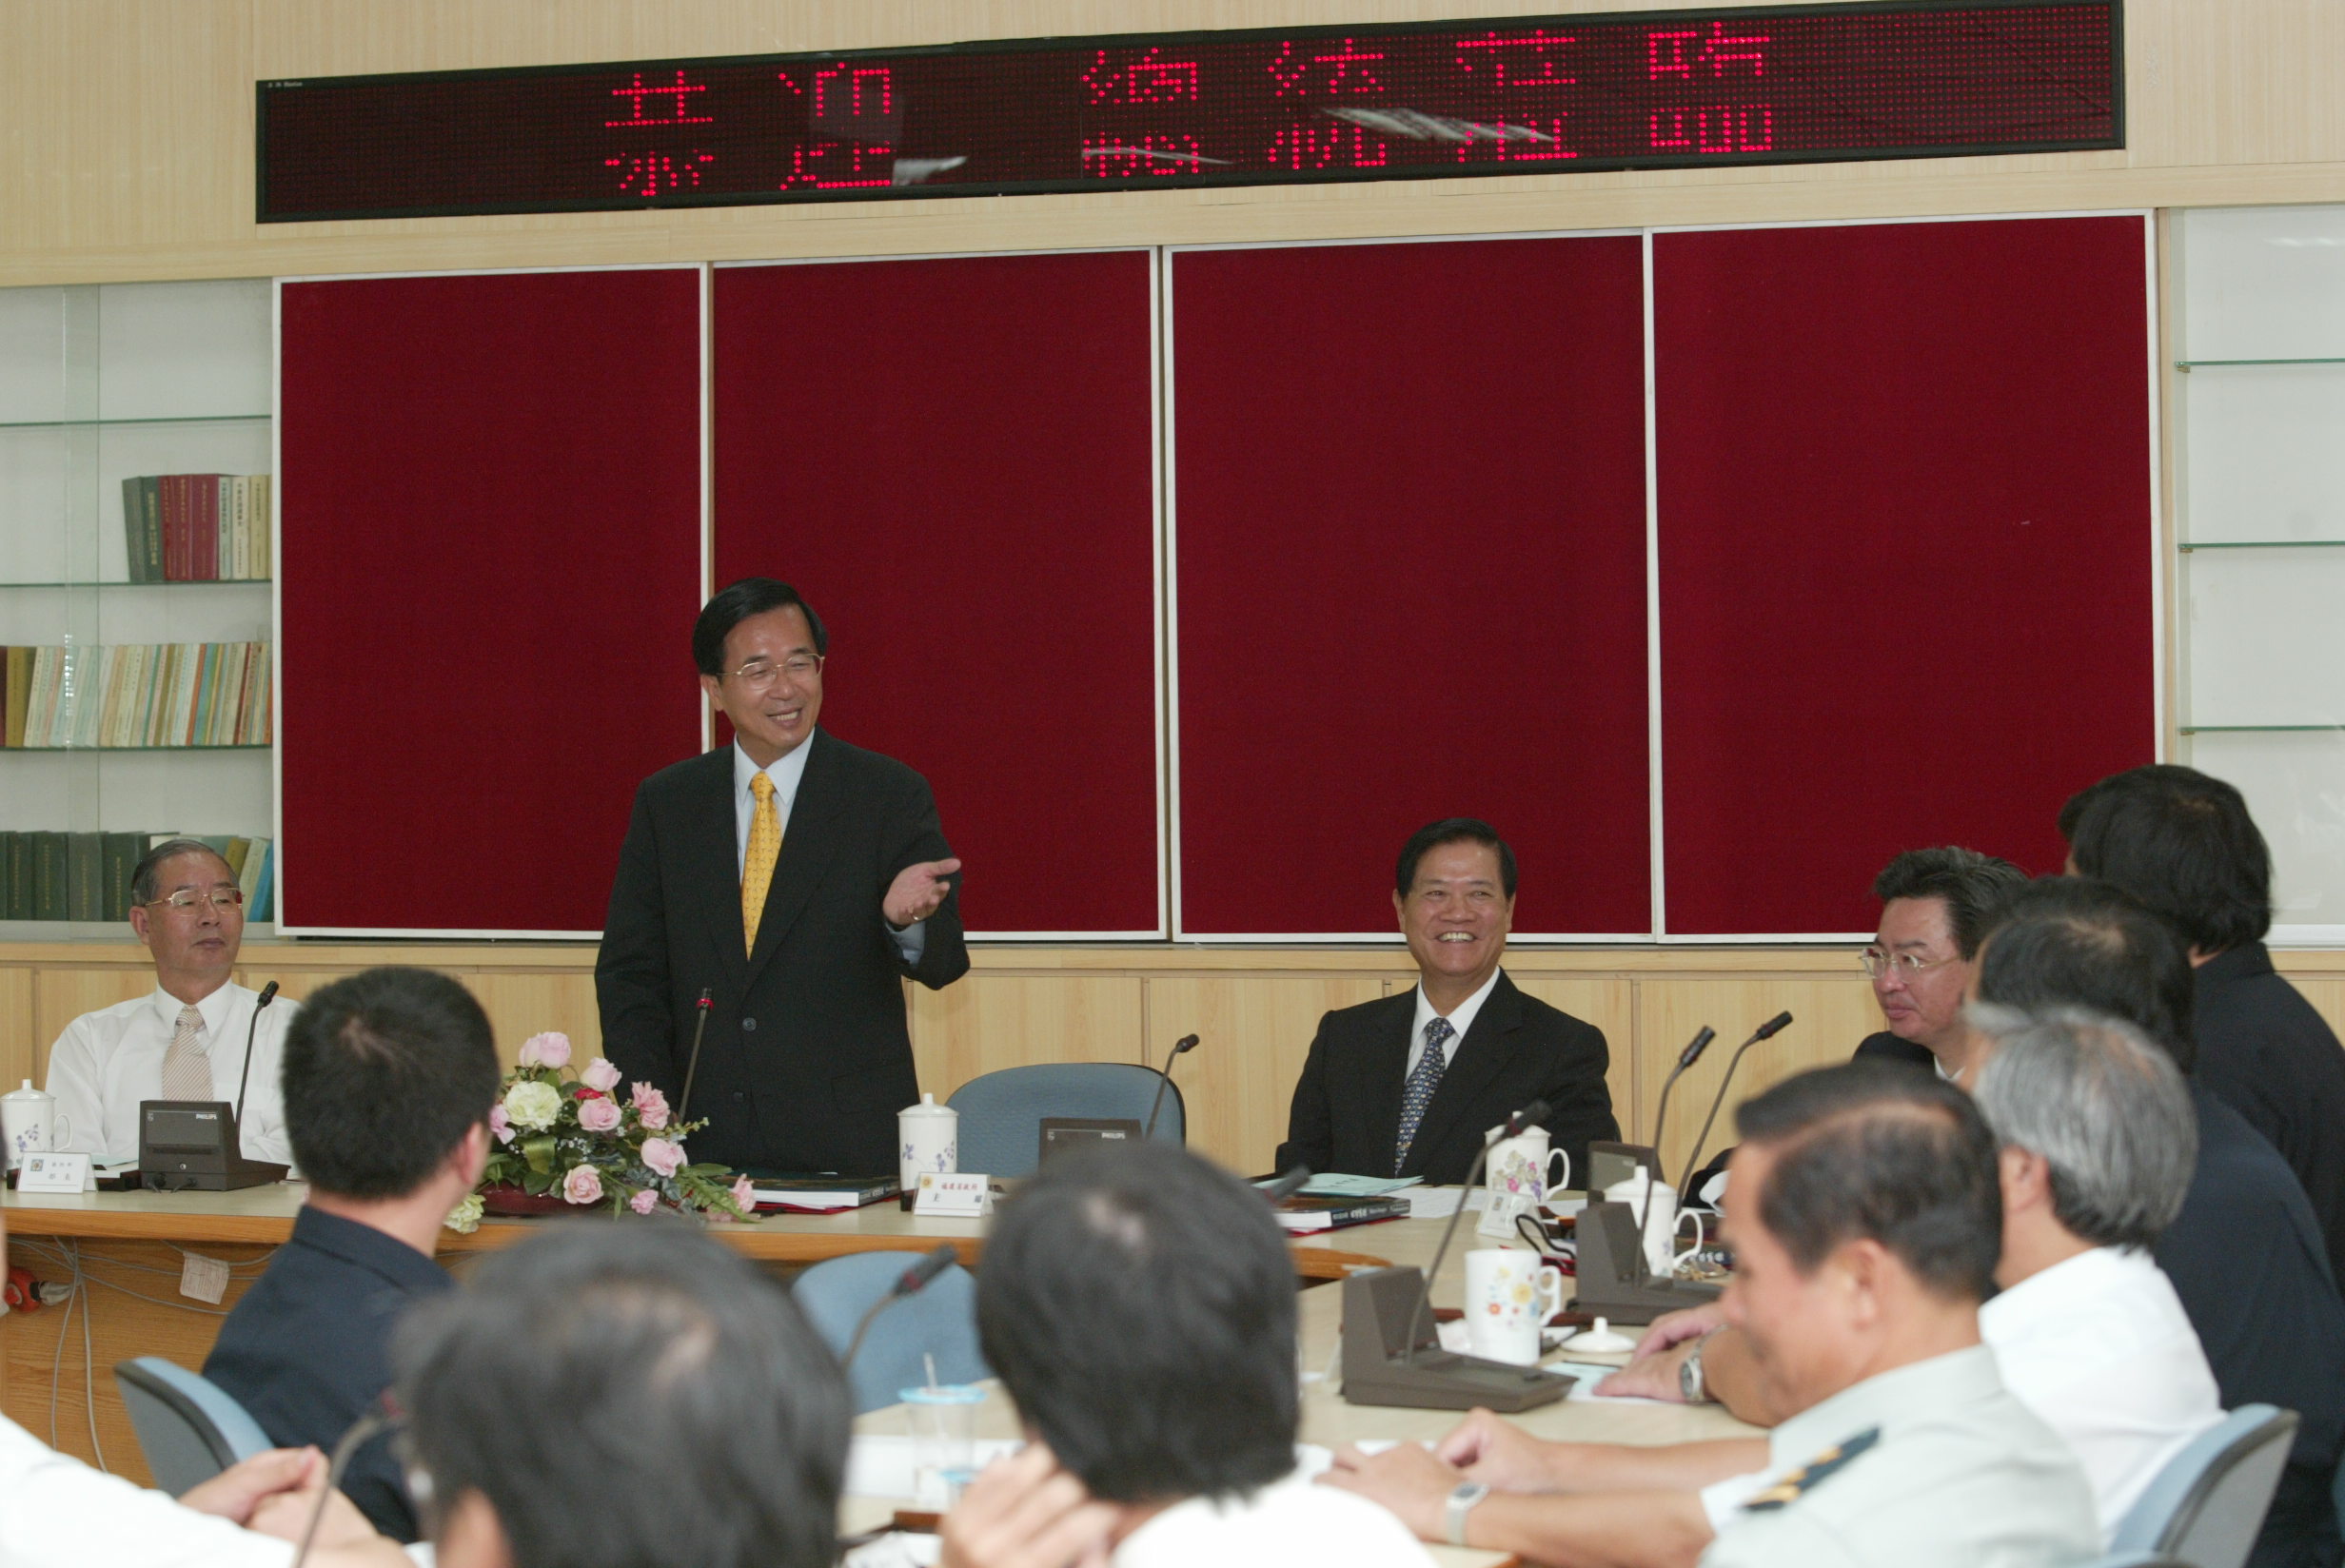 On July 30, 2003, President Chen Shui-bian visited the Lienchiang County Government (3rd from left is Yen Chung-cheng, the Governor of the Fujian Provincial Government)